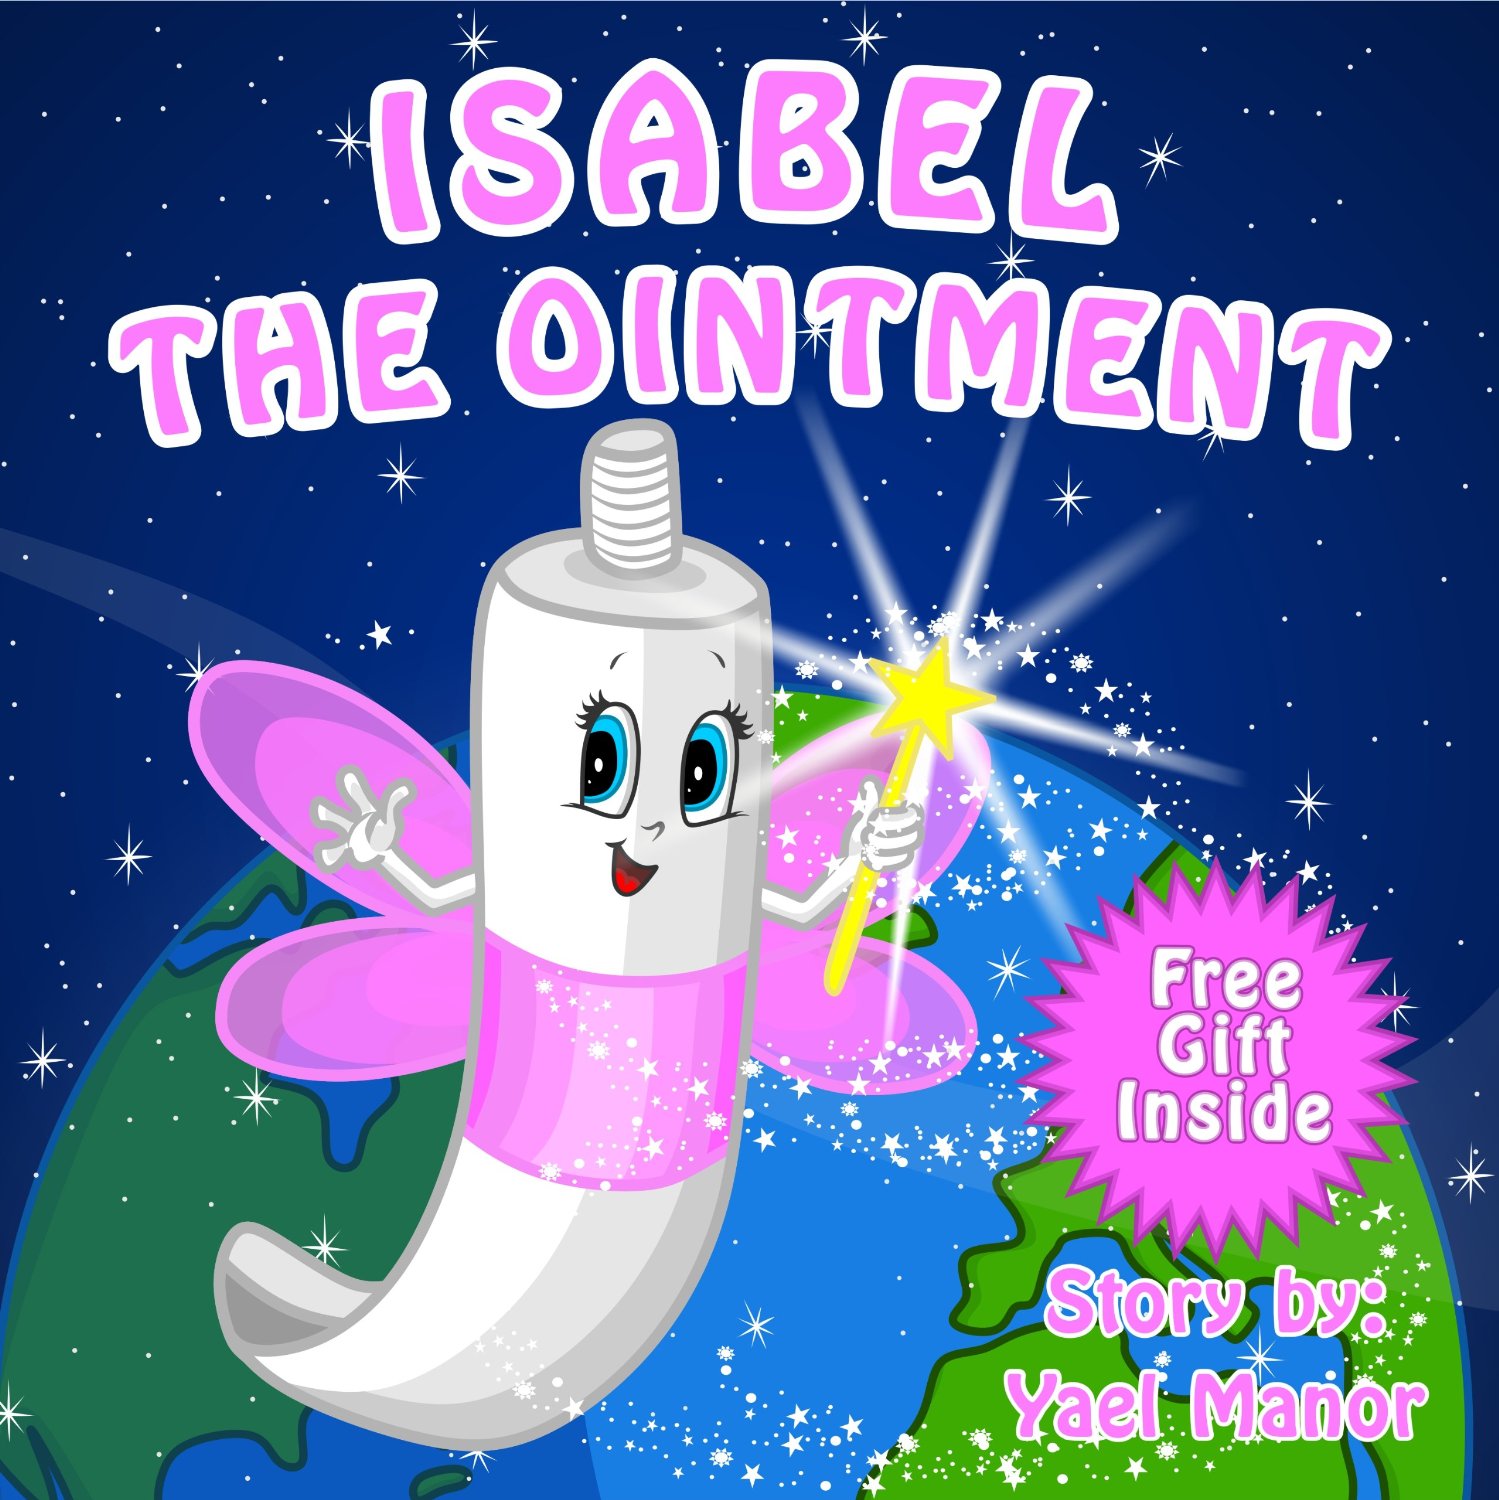 Isabel the Ointment by Yael Manor